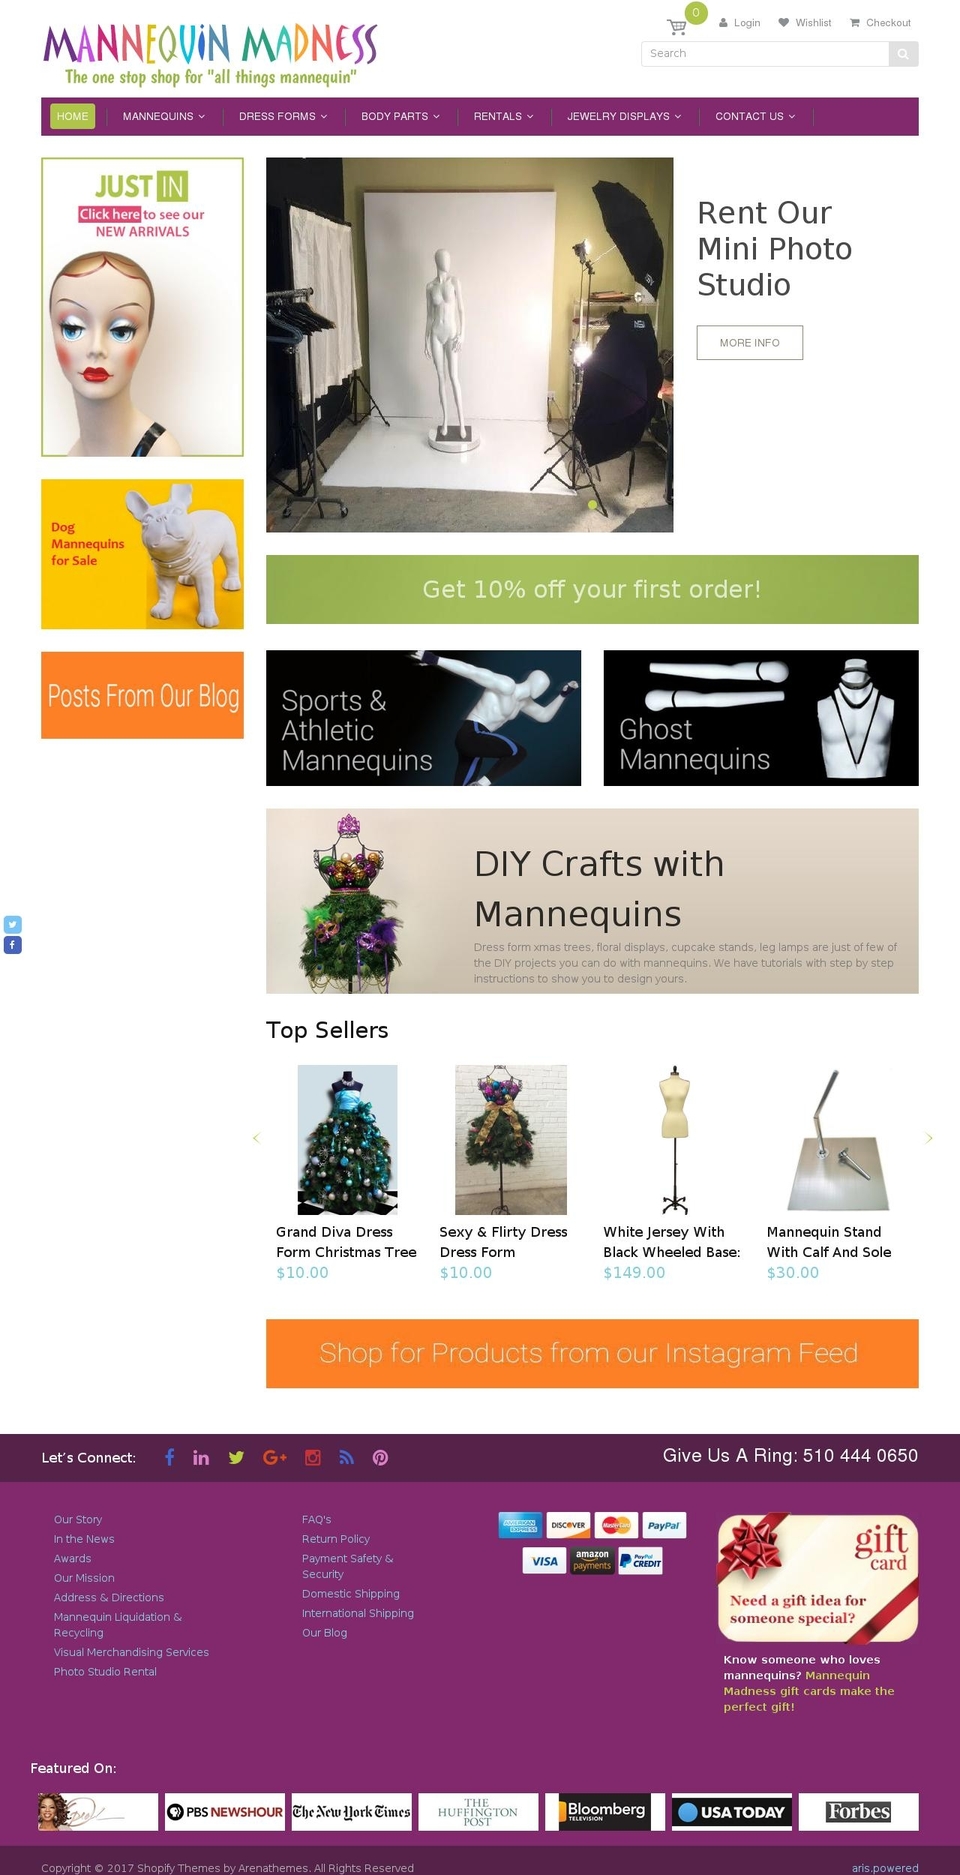 Impulse Shopify theme site example mannequinmadness.com